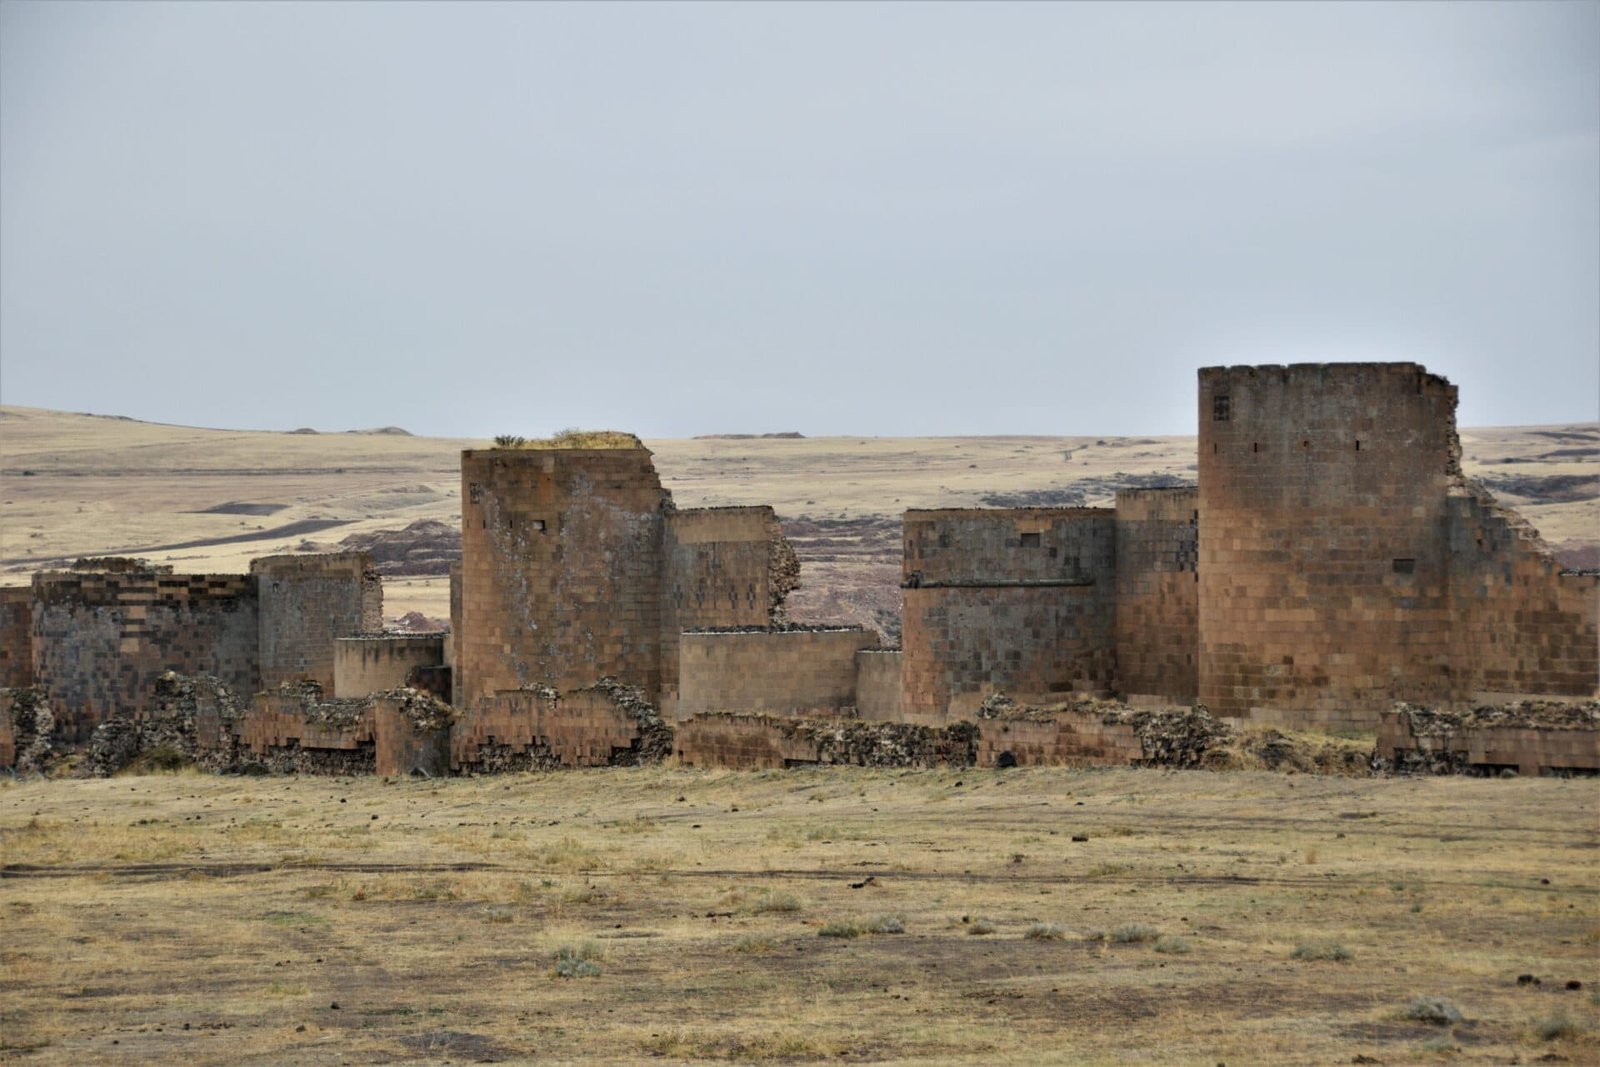 remains of the outer wall in the ancient city of Ani